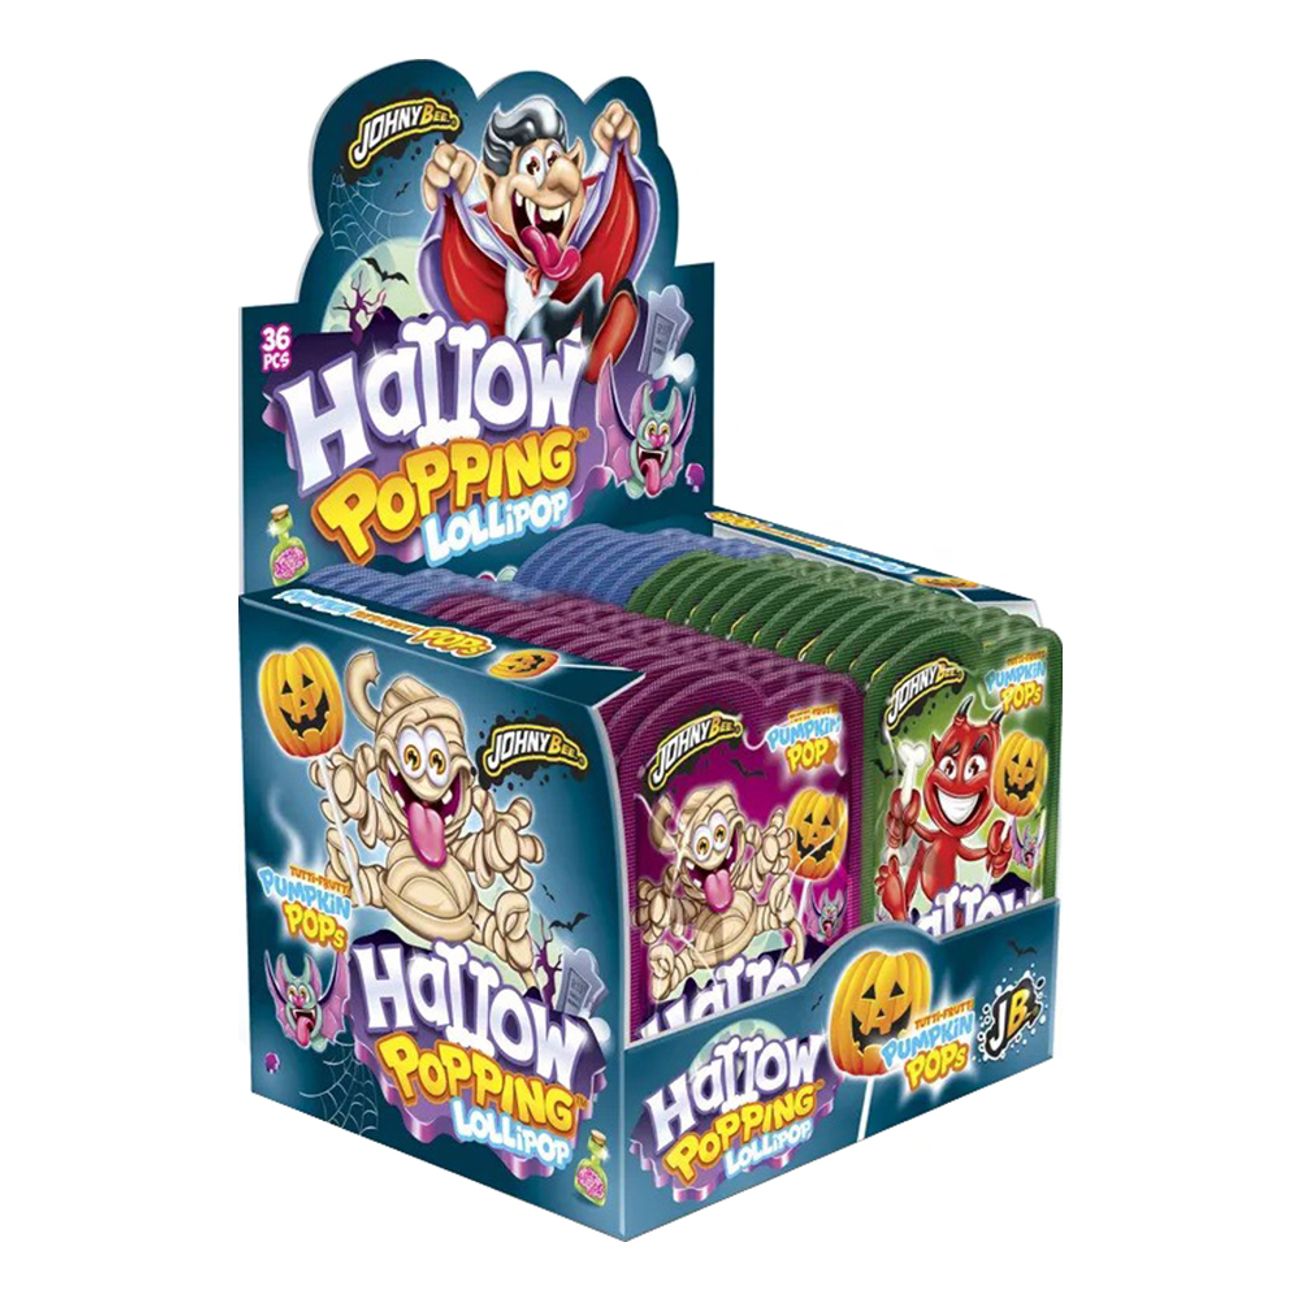 hallow-popping-lollipop-storpack-97757-3